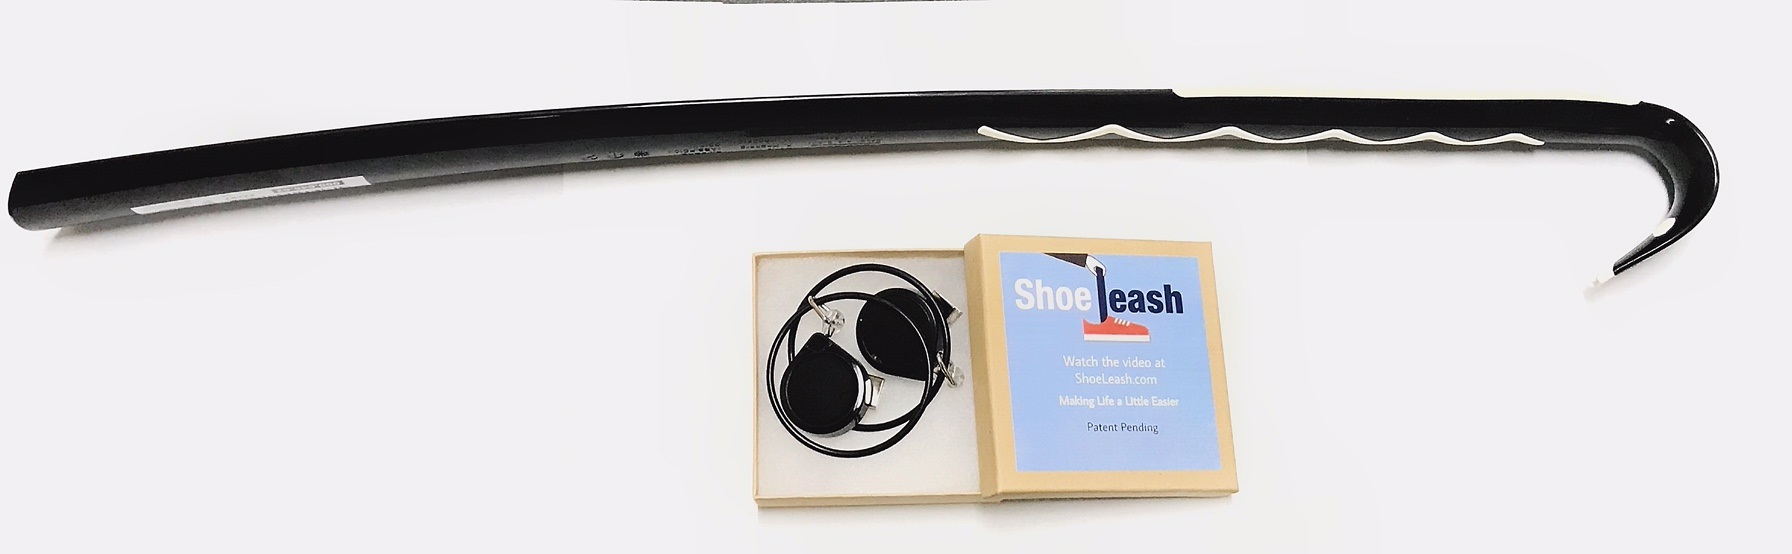 ShoeLeash with shoe horn - never bend over again